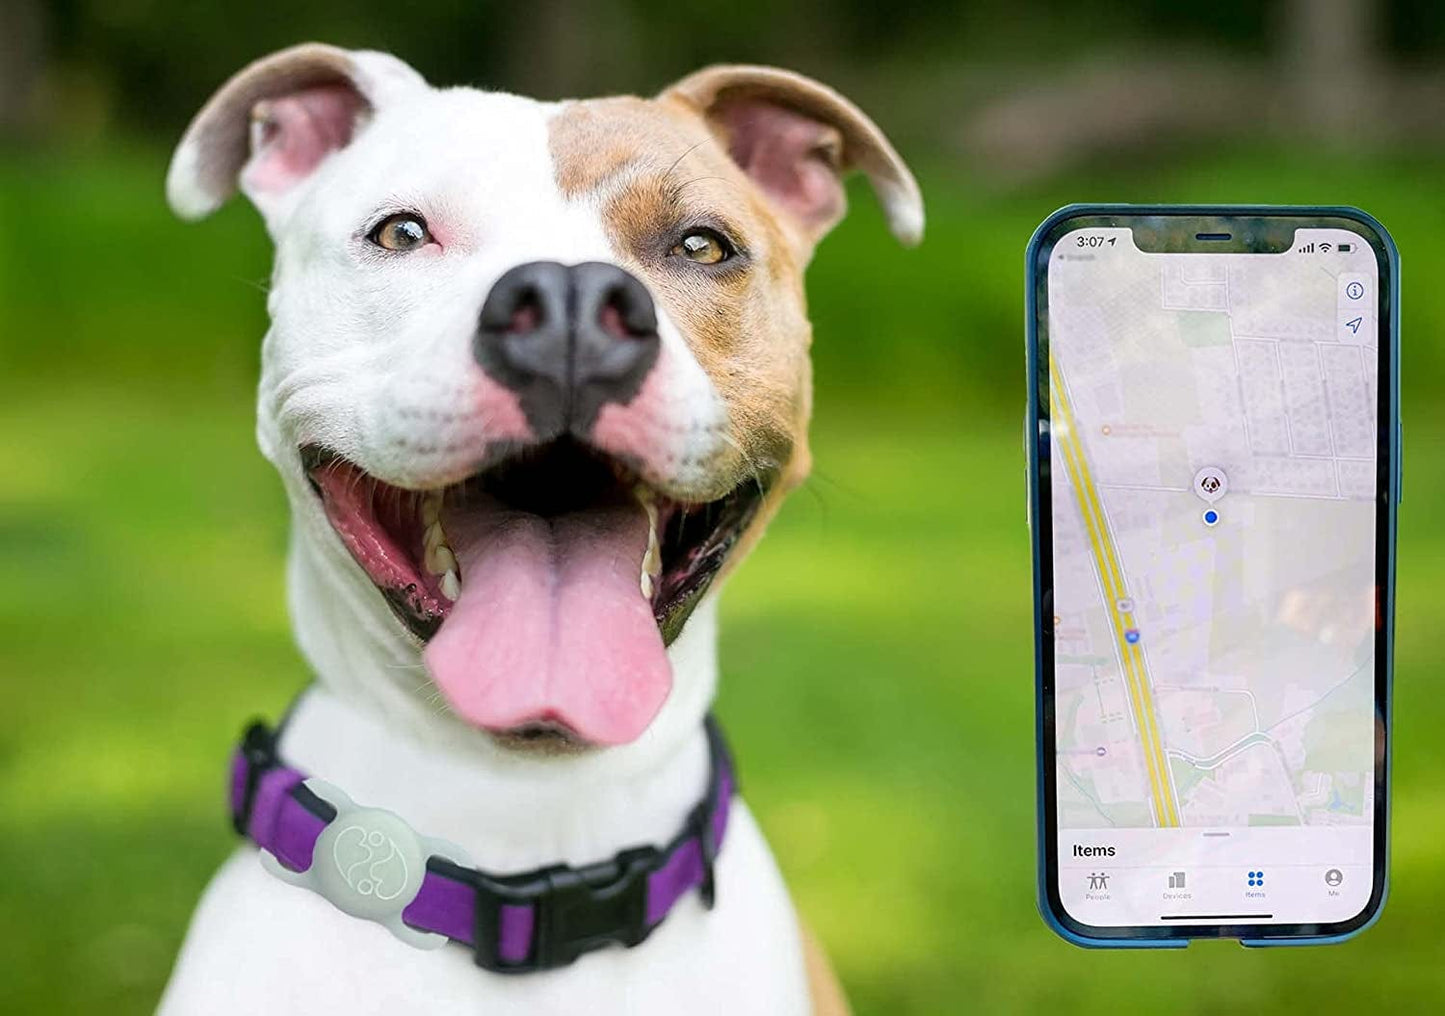 Abiwares Apple Airtag Case for Pets 2Pk Glow in the Dark Apple Airtag Case - Airtag Case for Collars, Backpacks, Luggage Anything with a Strap - GPS Tracker Case - Dogs Cats Pets Tracker Holder